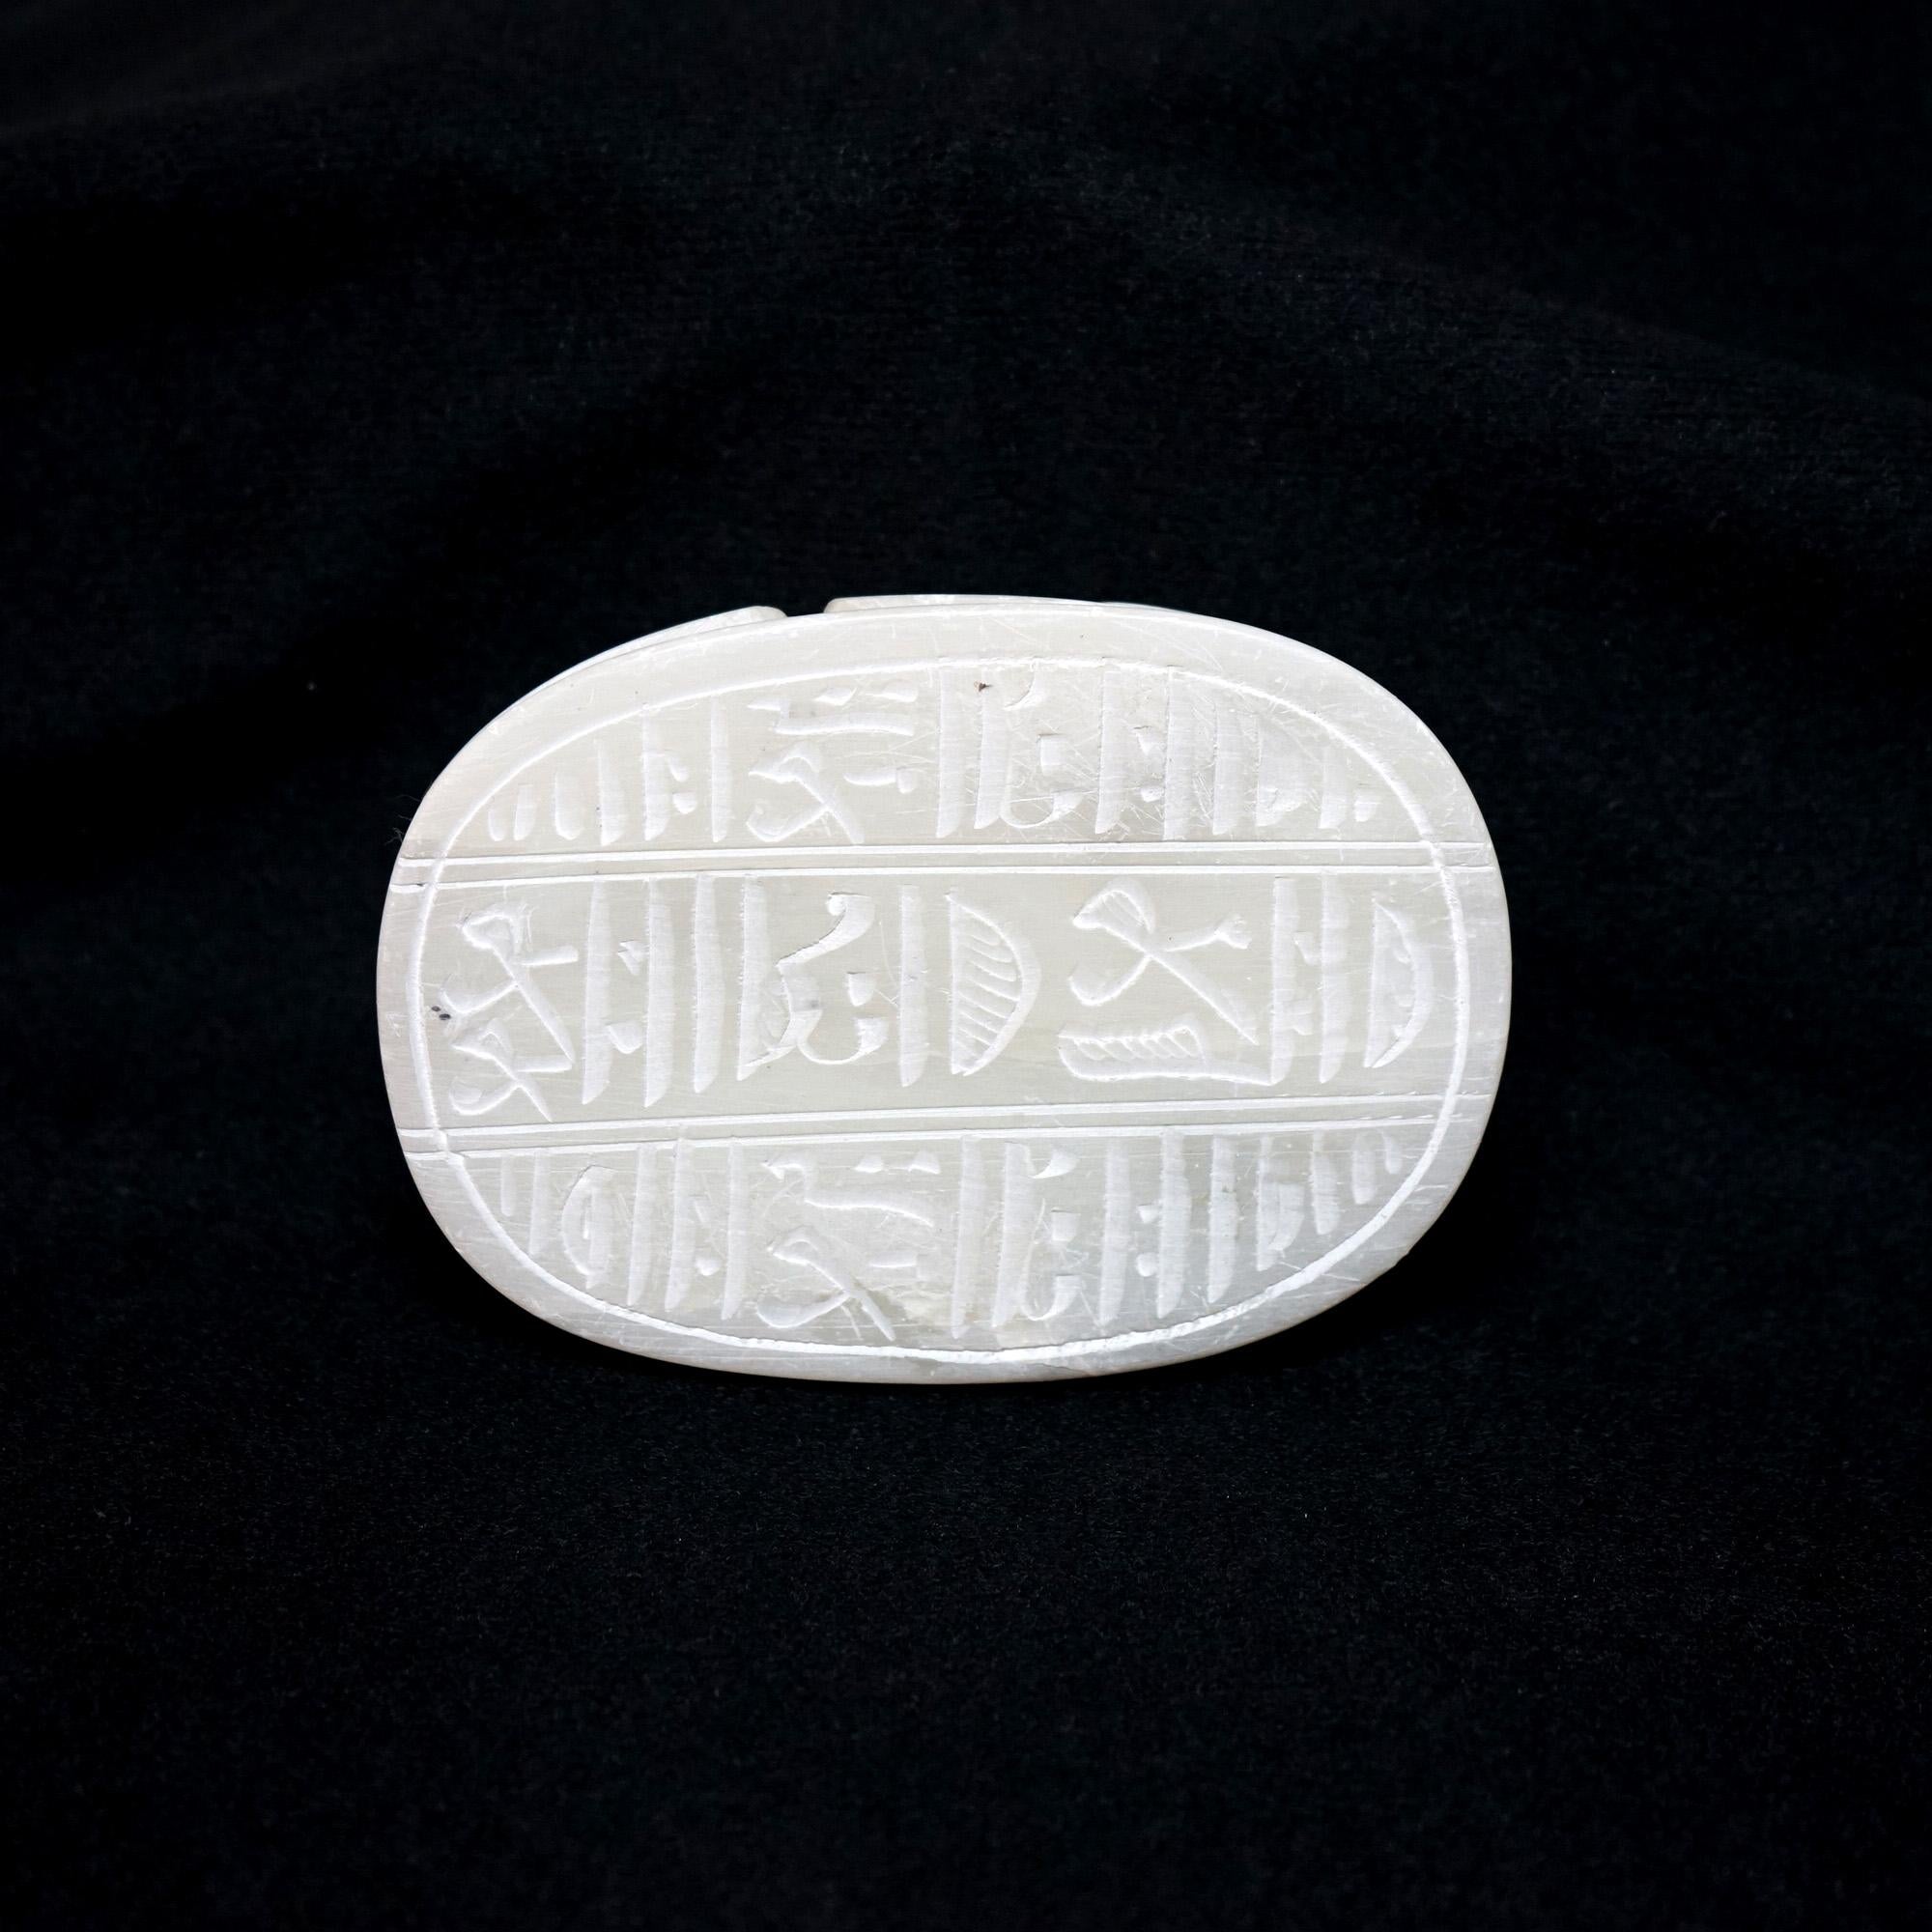 A Vintage Egyptian Revival Carved Alabaster Scarab Figure Paperweight with Tribal Design on Base 20th C

Measures - 1.75